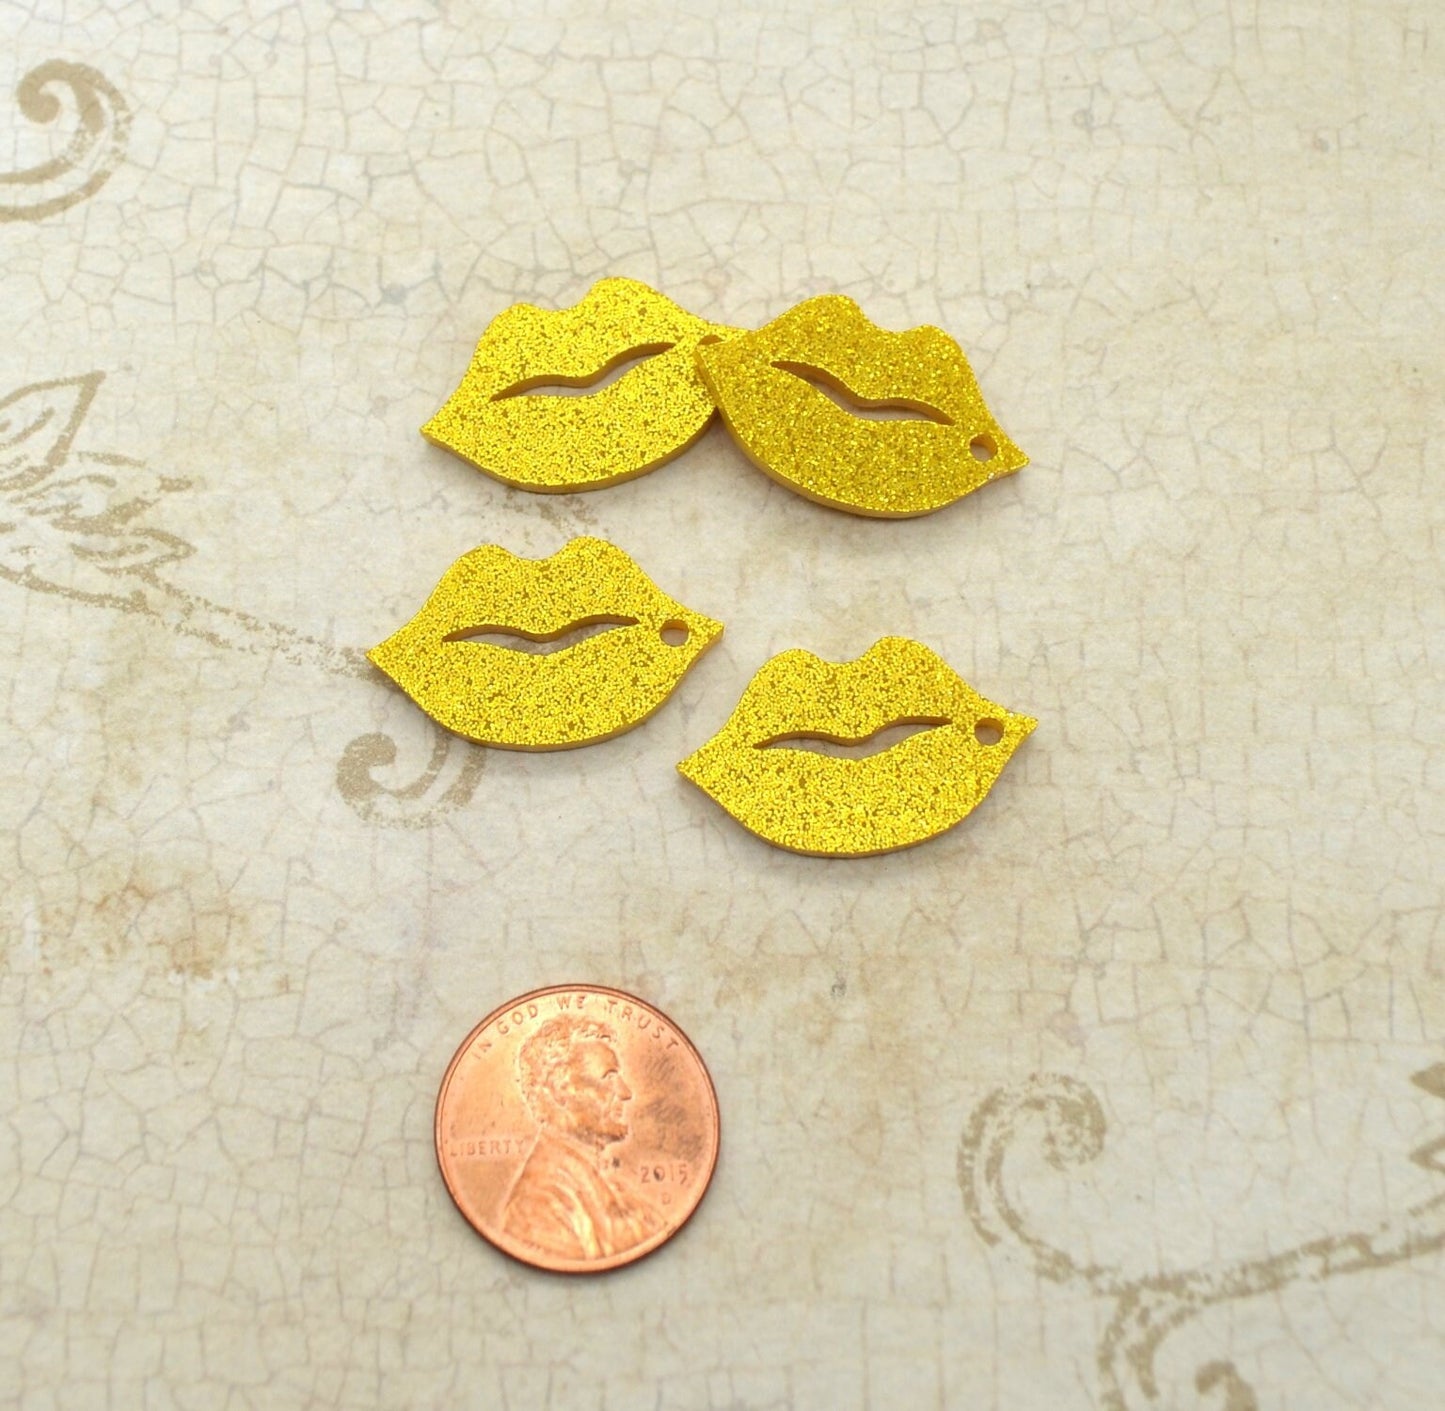 GOLD GLITTER LIPS - 4 Charms - 1 Hole - In Laser Cut Acrylic